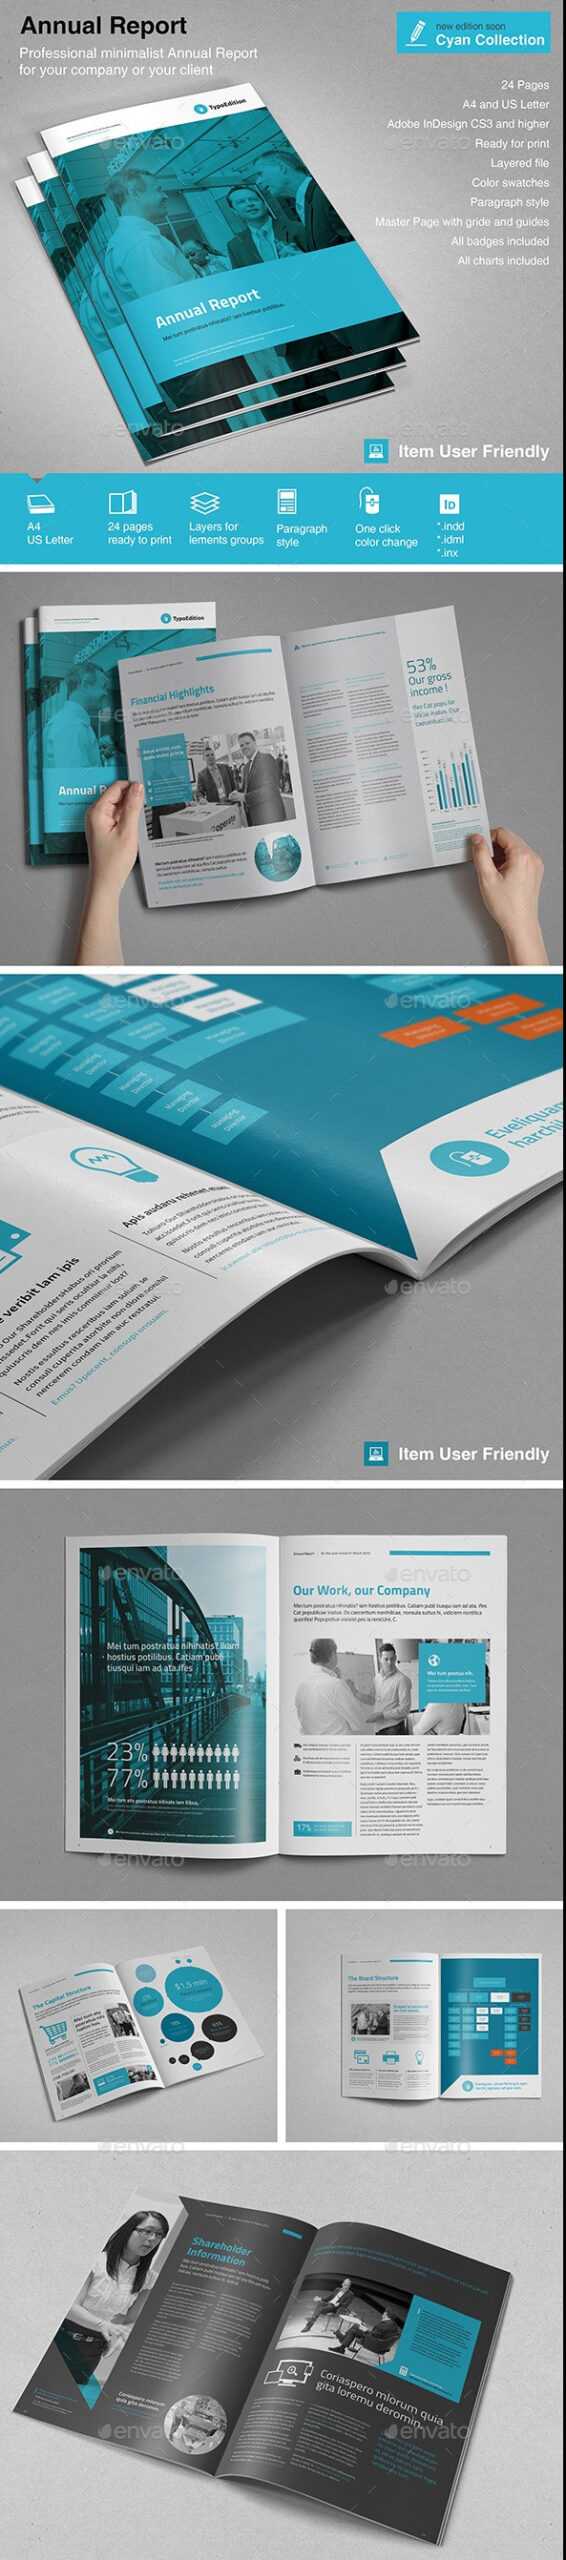 32+ Indesign Annual Report Templates For Corporate Within Free Annual Report Template Indesign